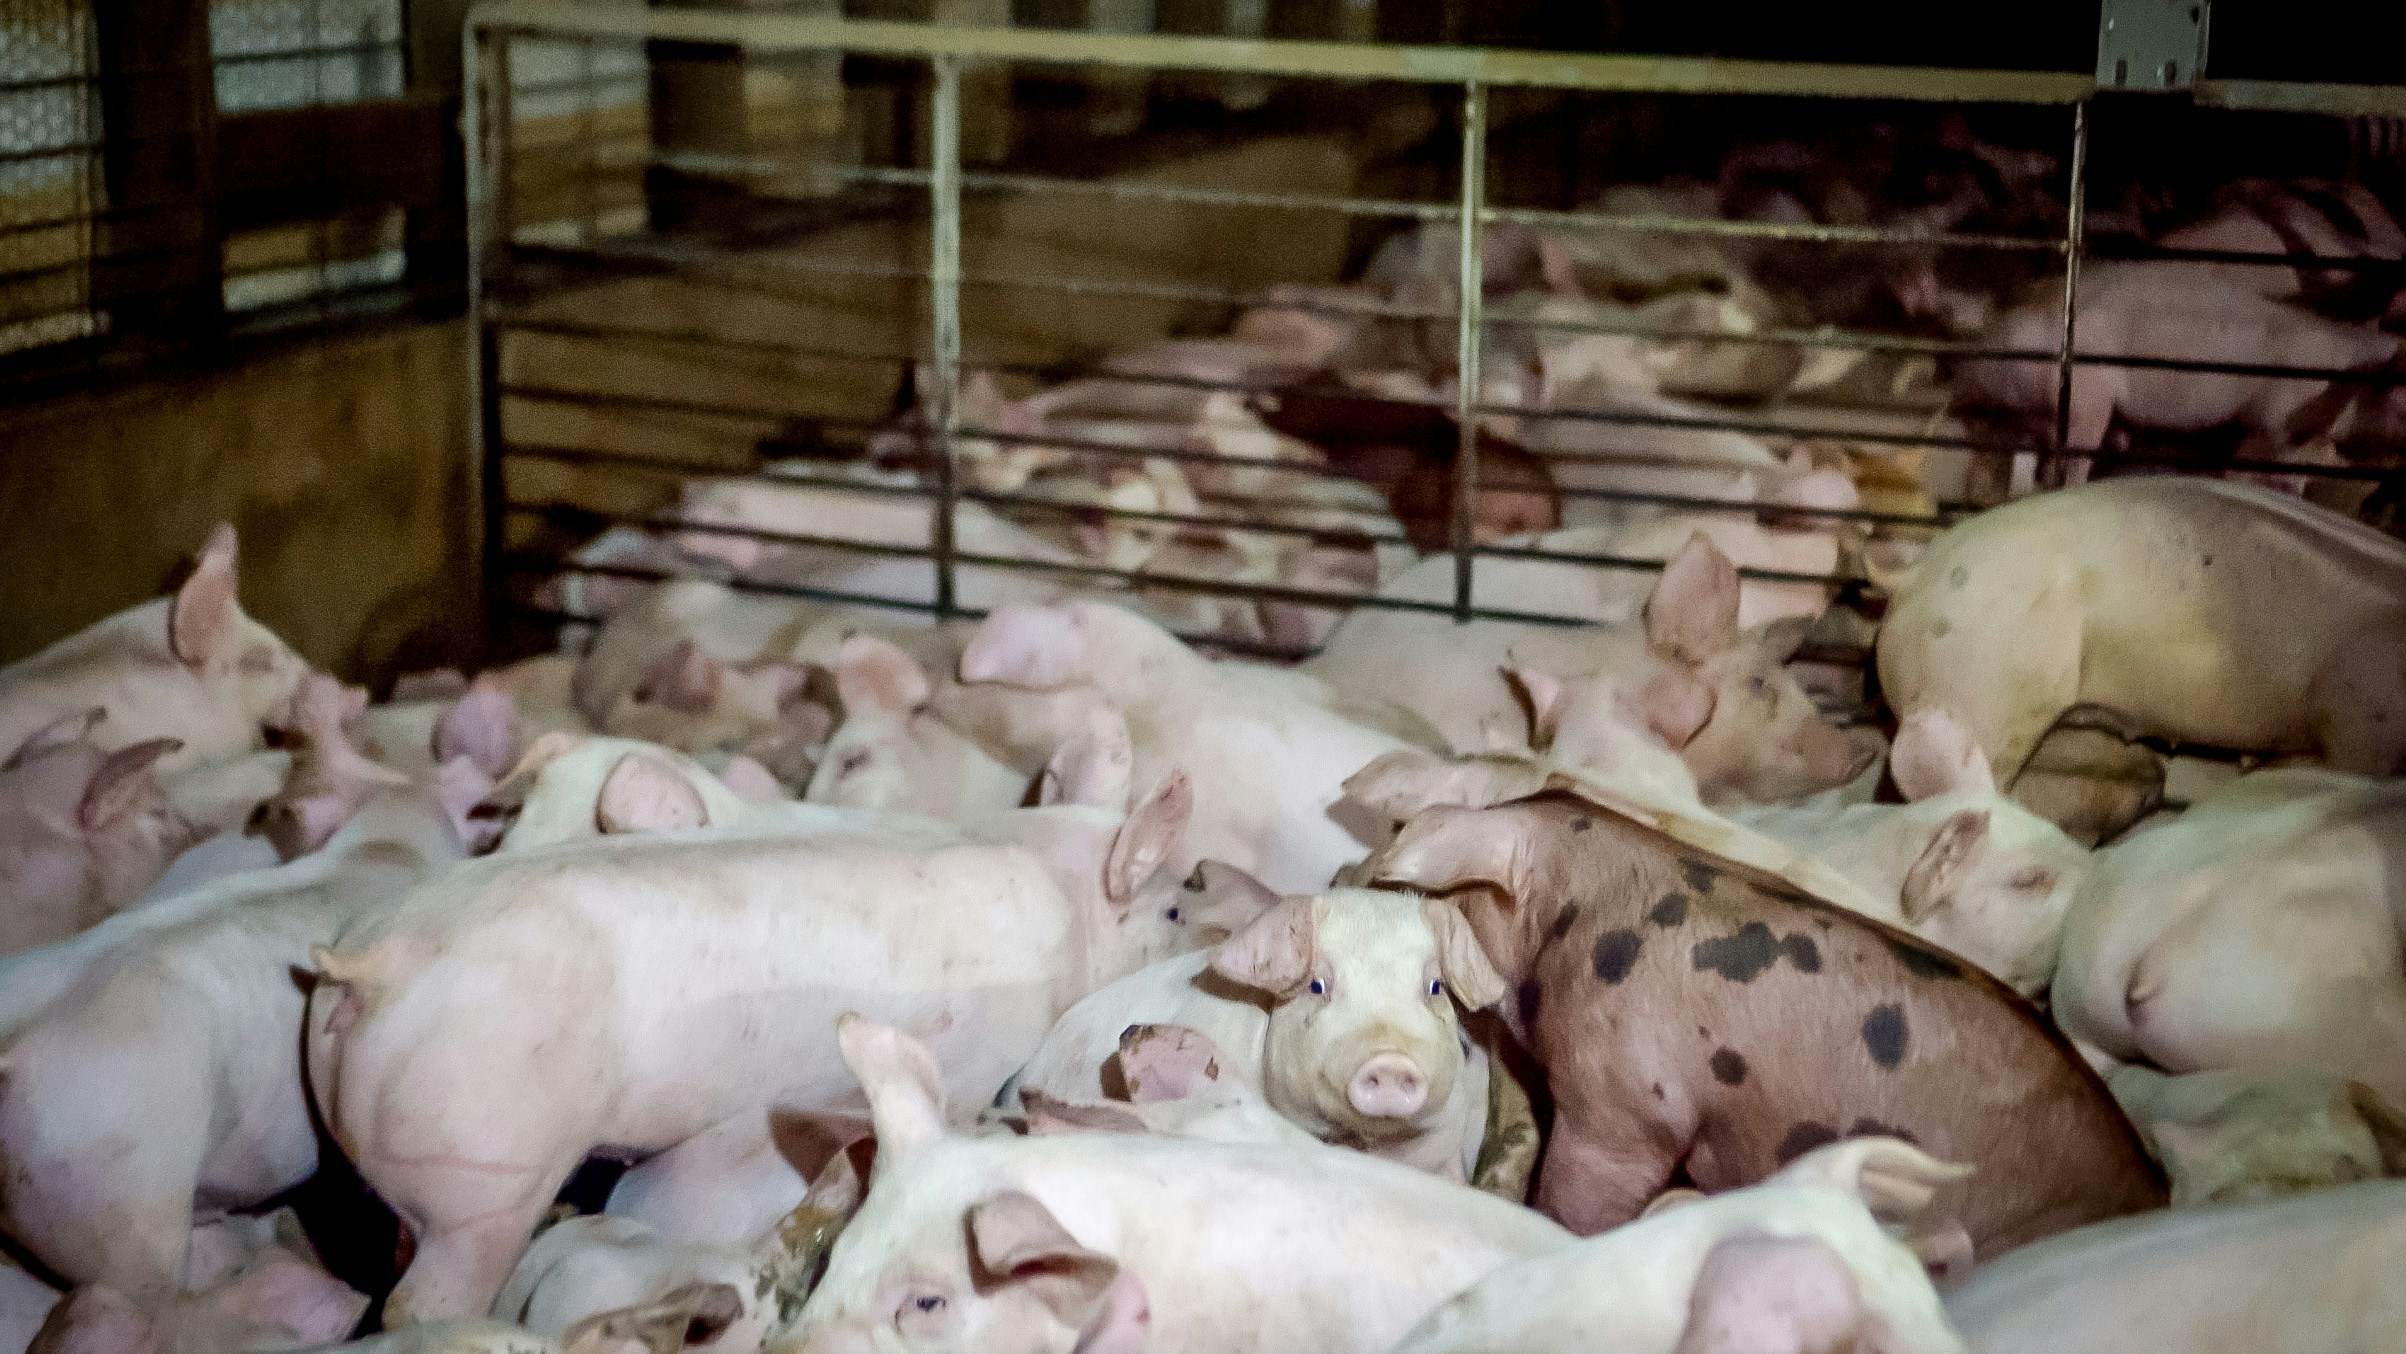 Animal Rights Activists Uncover Locations of Factory Farms